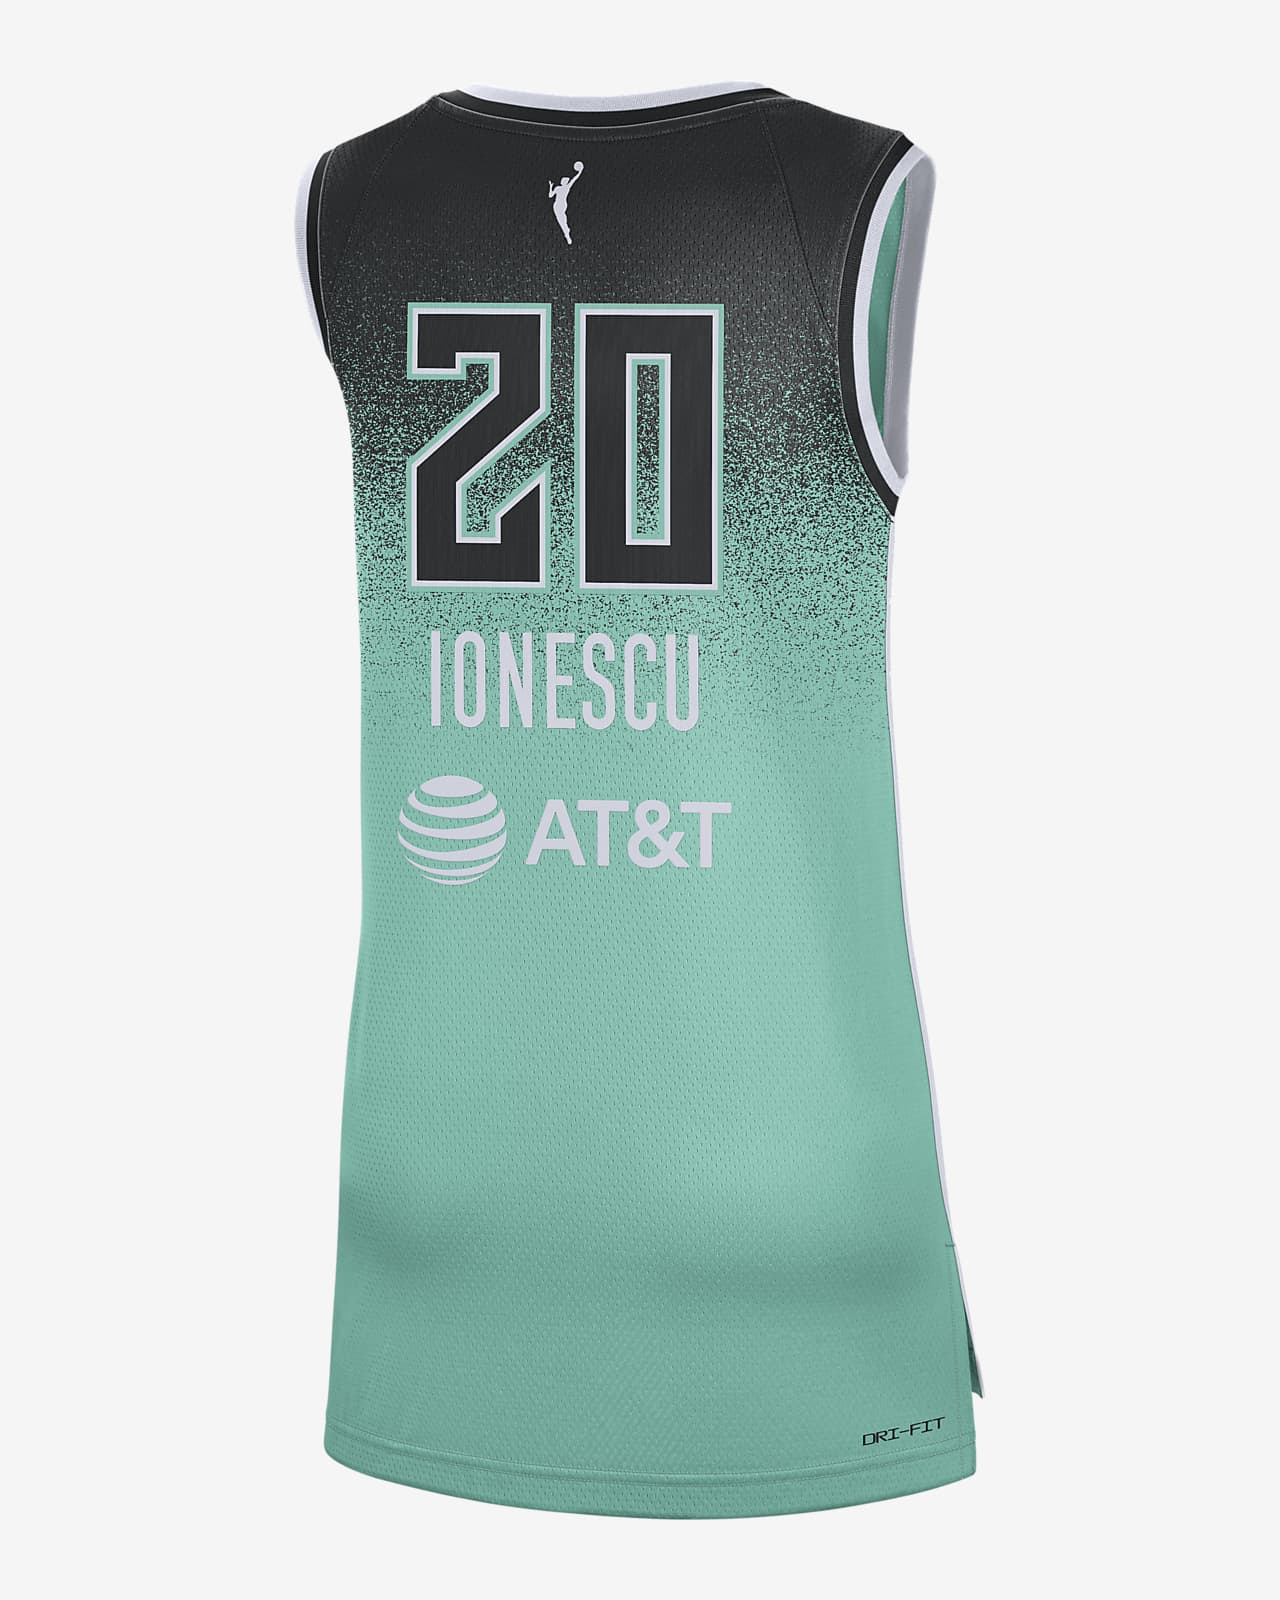 Nike finally made Sabrina Ionescu jerseys, and they sold out in hours 